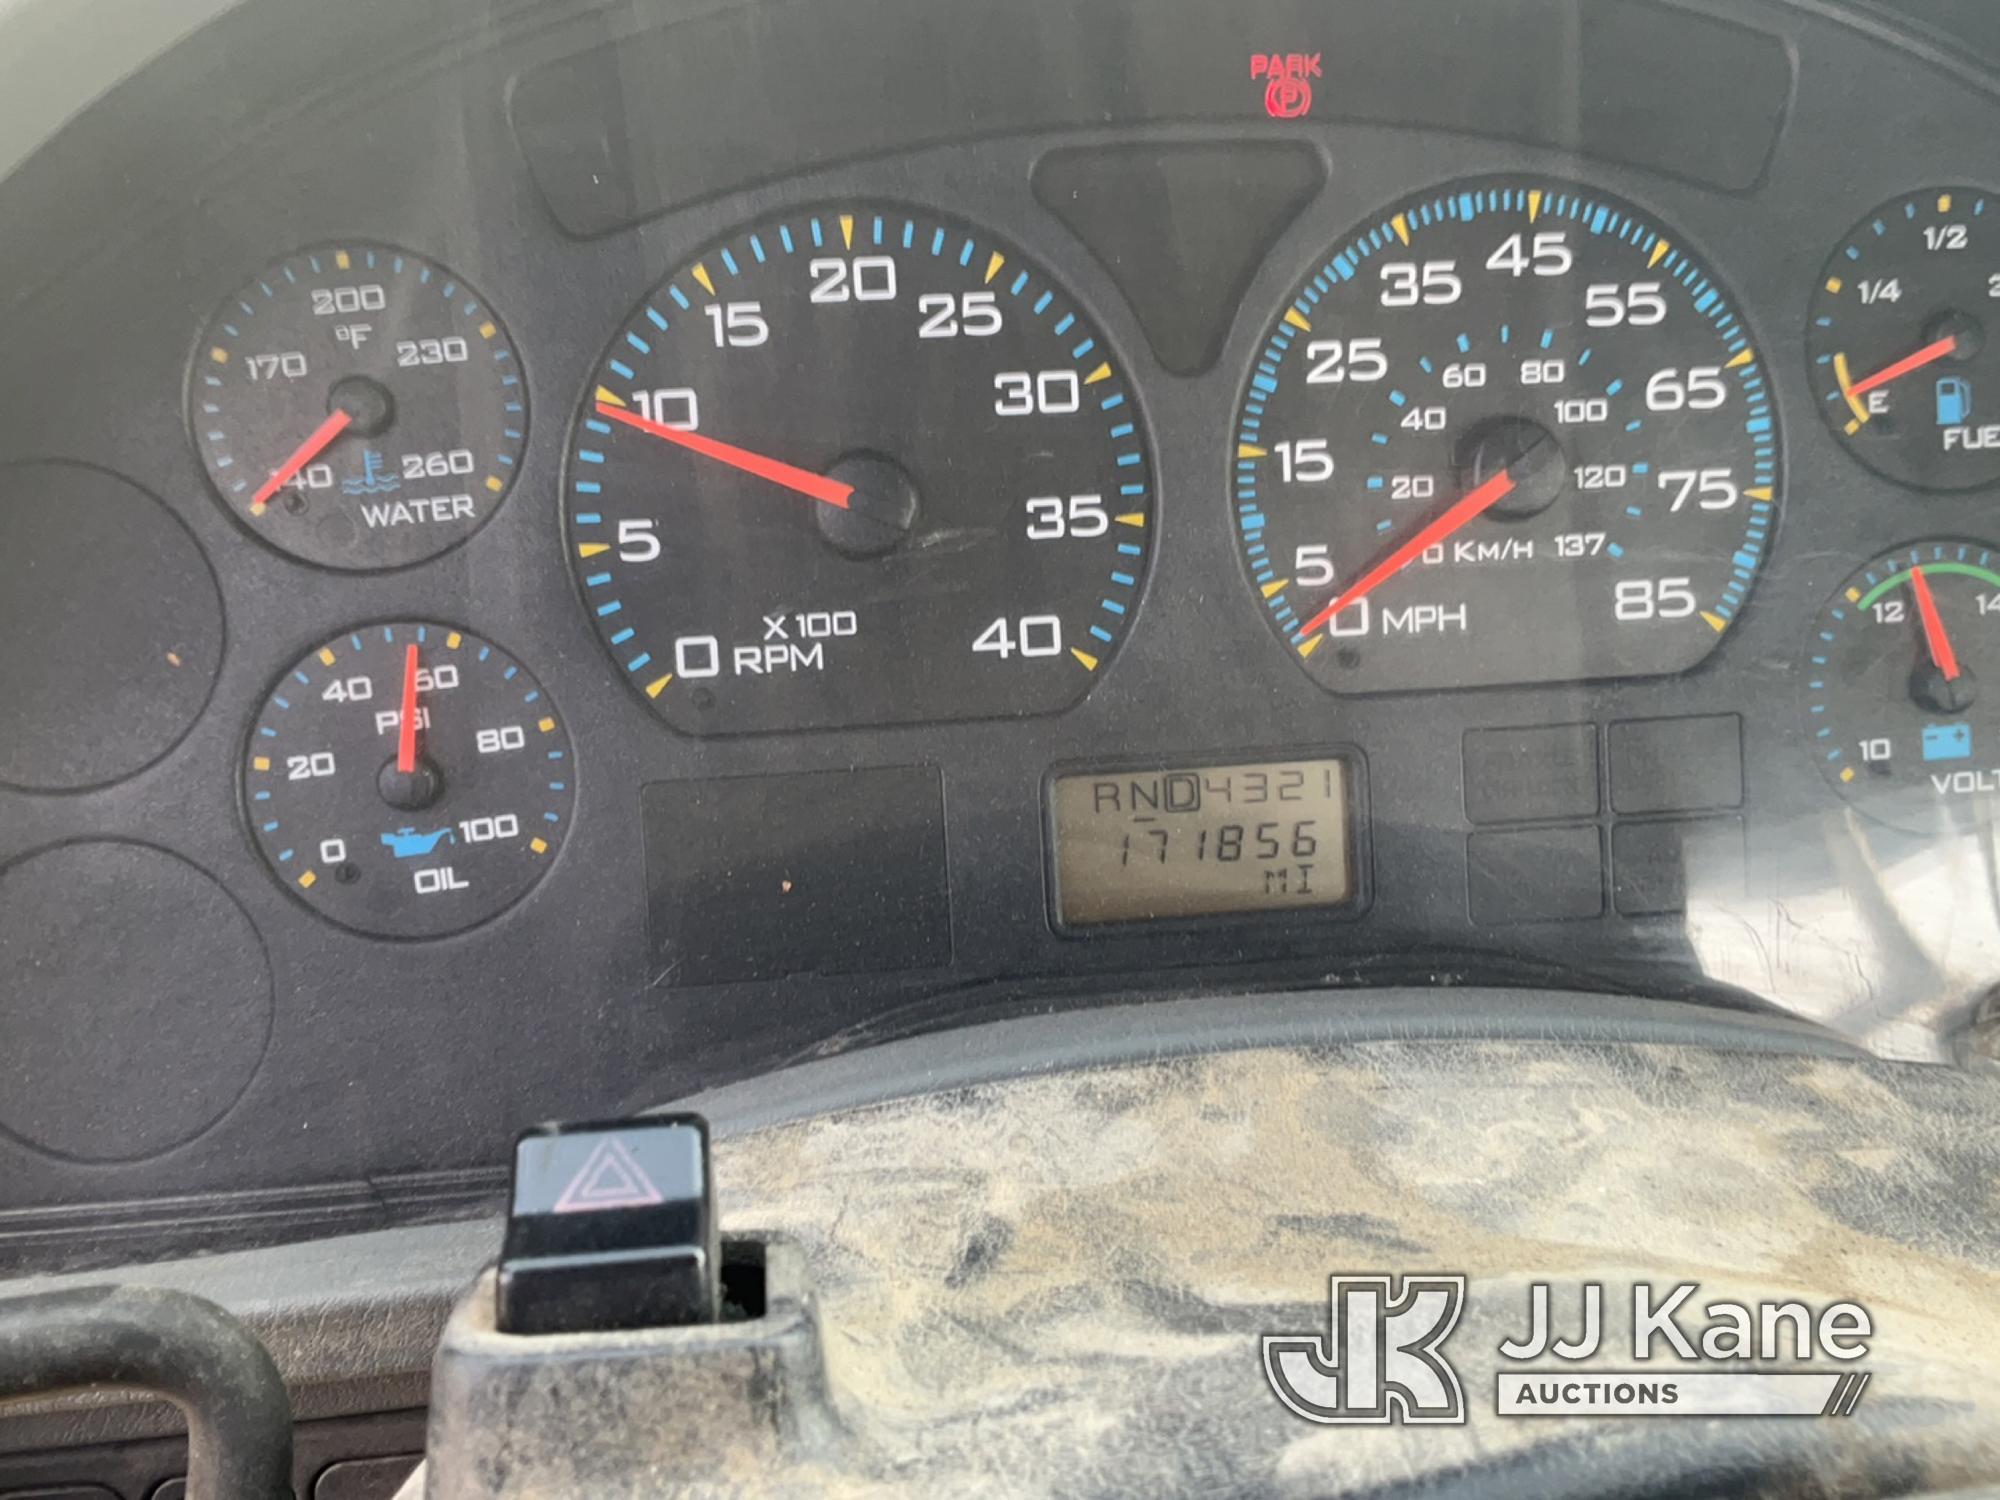 (Tipton, MO) 2003 International 7400 T/A Truck Tractor Runs and Moves.